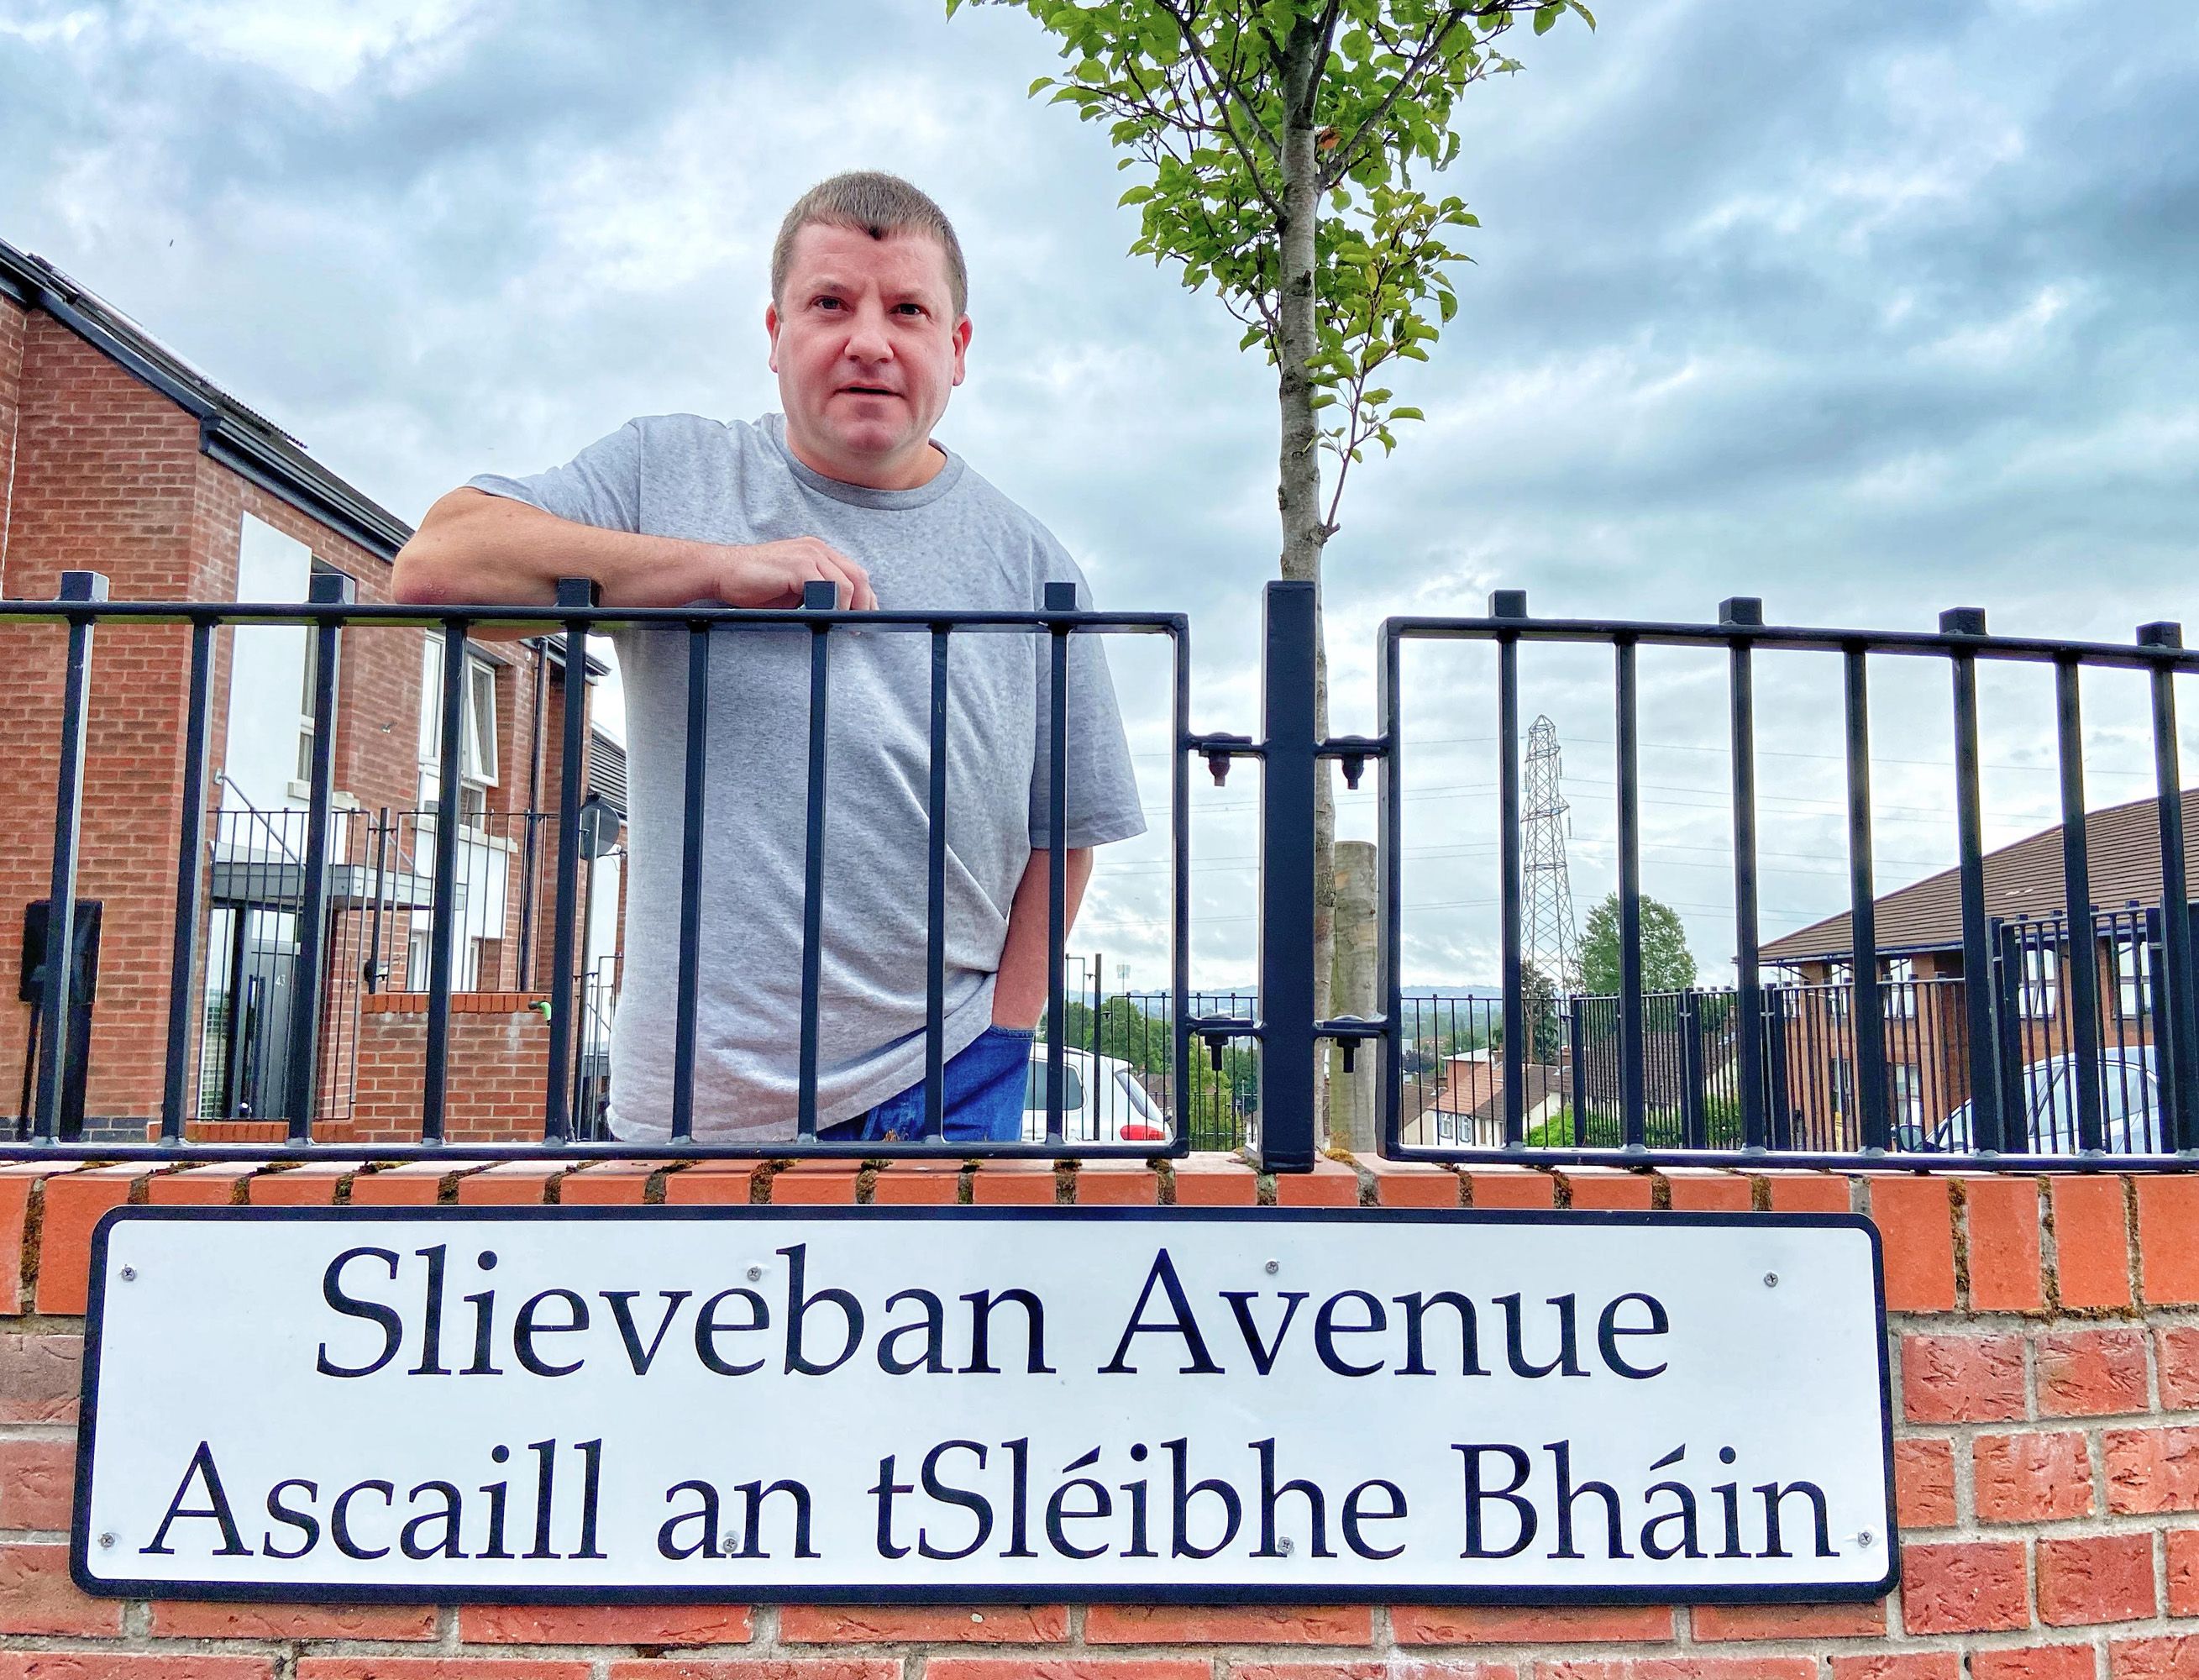 SF CLLR CIARÁN BEATTIE: In 1985 the Anglo-Irish Agreement promised an end to the ban on Irish street names. 35 years later, the strict regulations governing a name change make it almost impossible to have Irish street signs erected in Belfast.